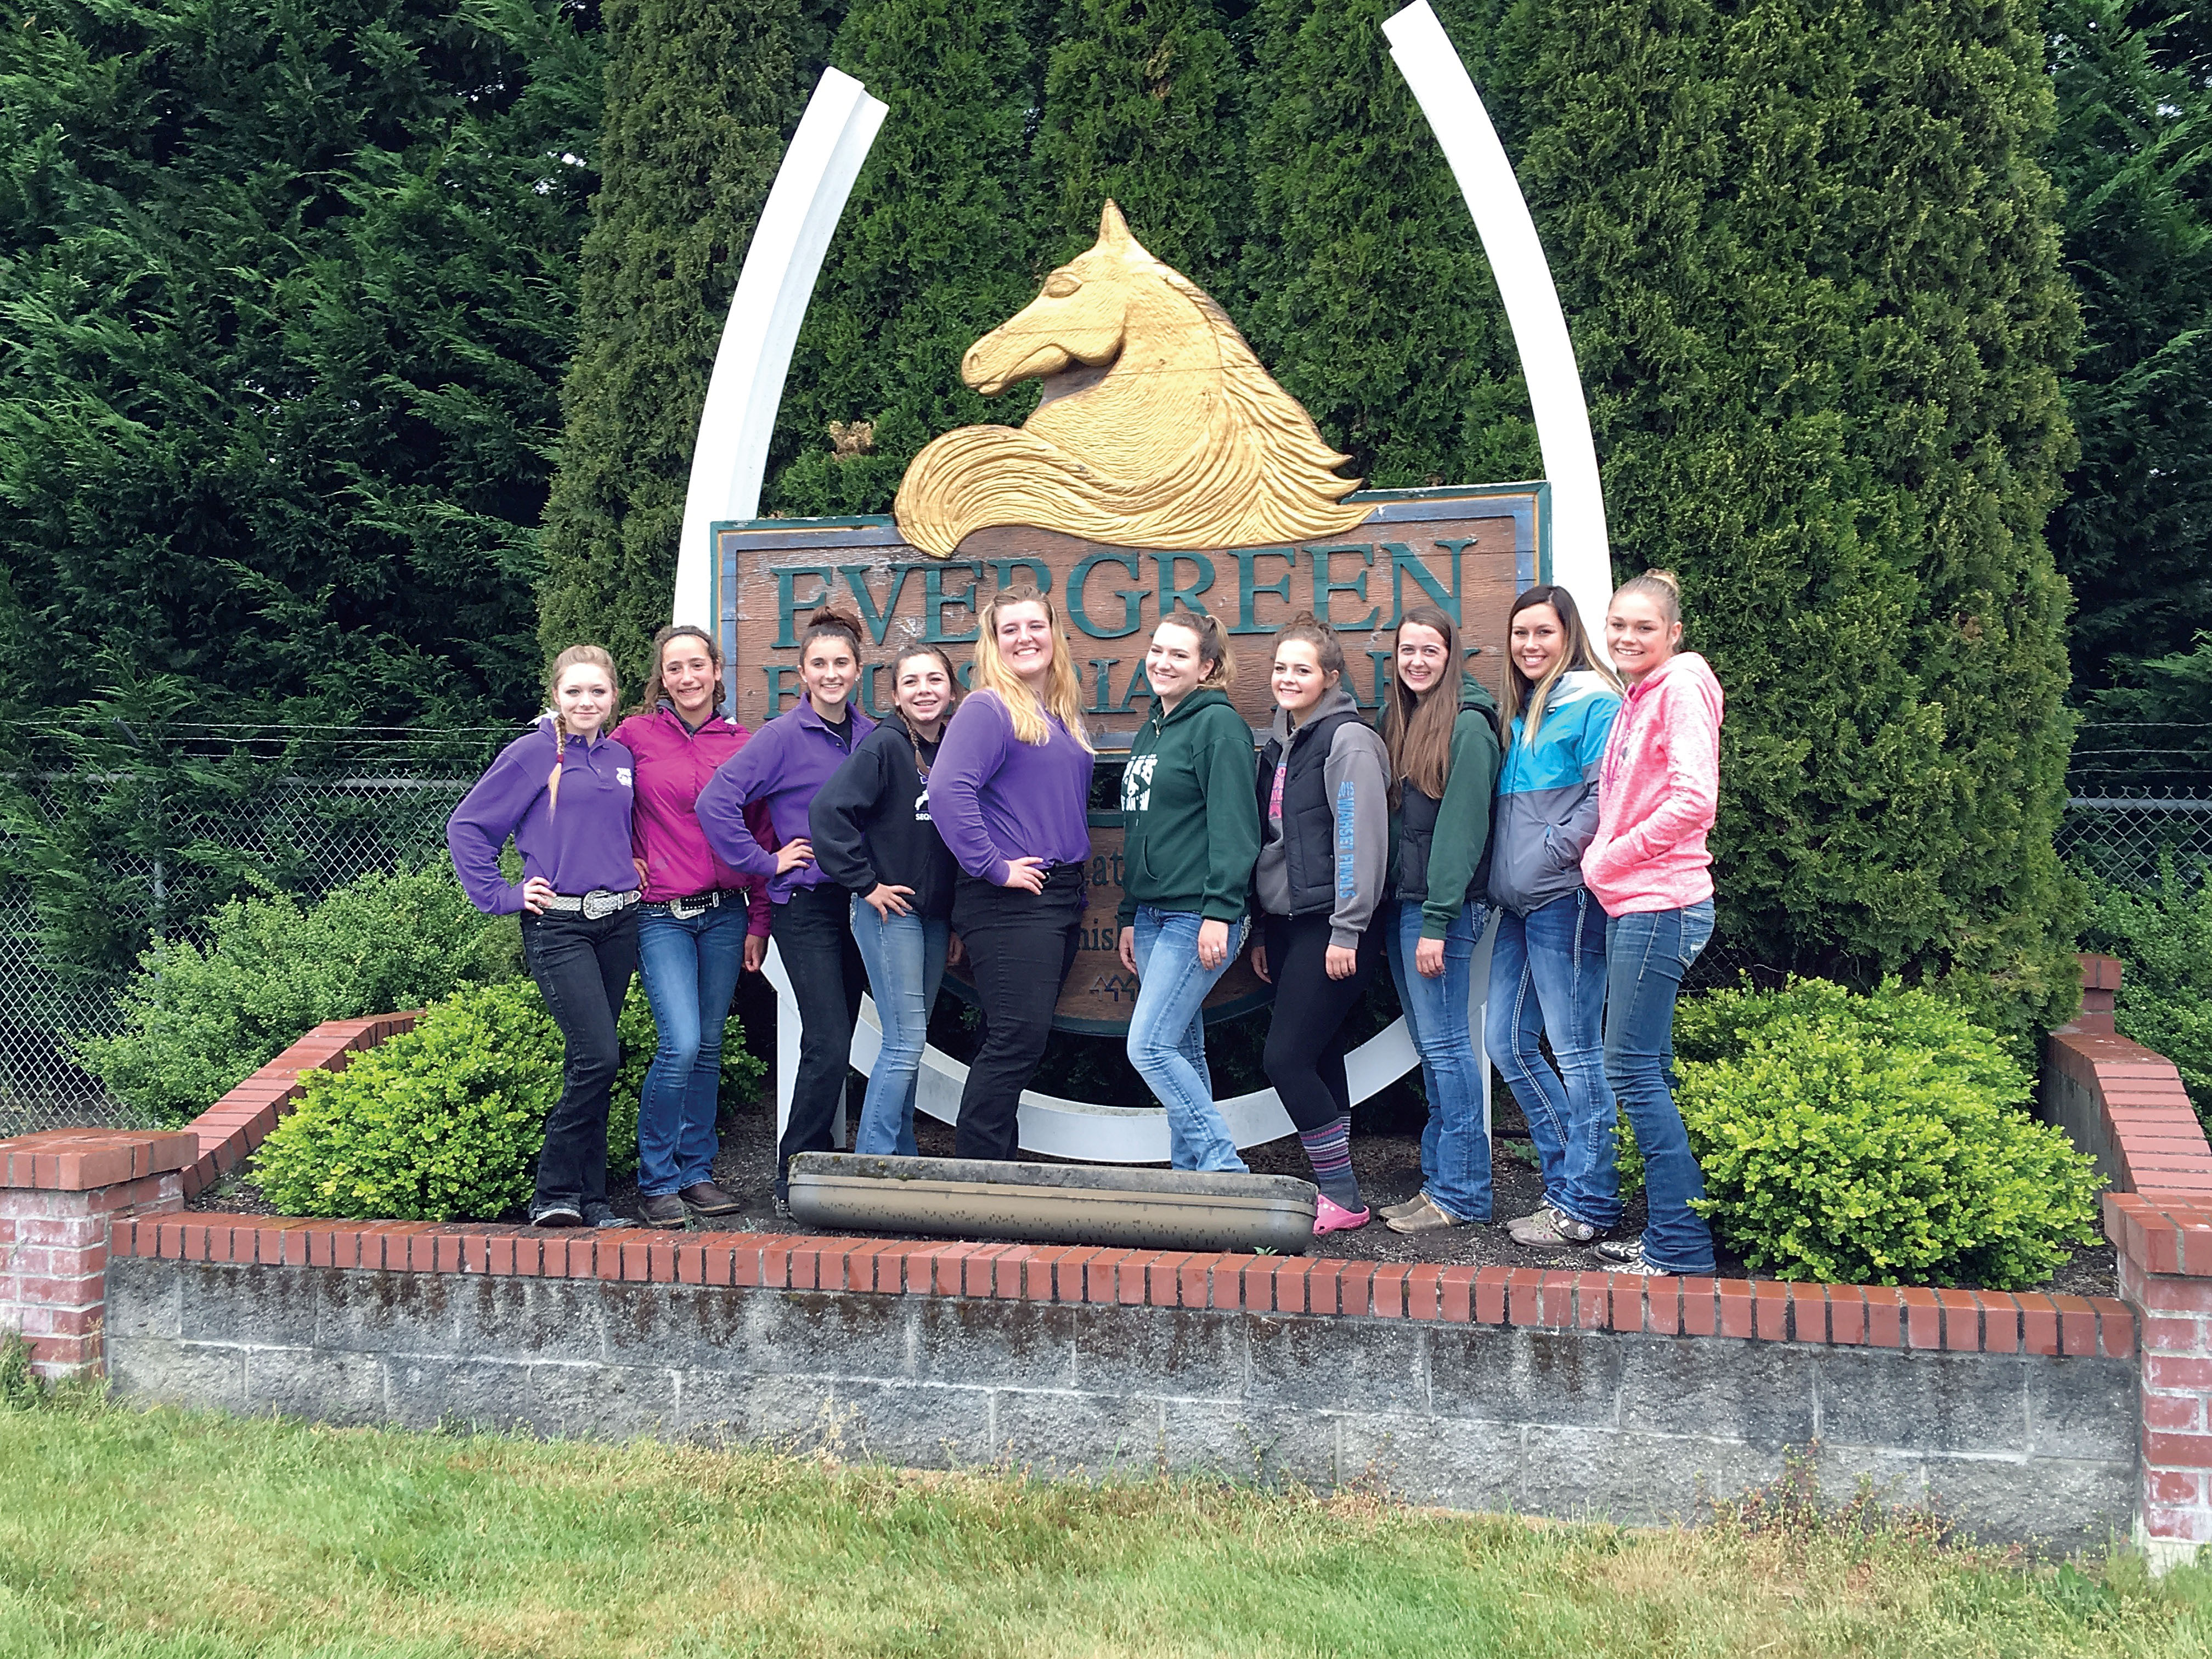 The Port Angeles and Sequim High School equestrian teams recently competed at the Washington High School Equestrian Team State Finals in Monroe. Shown here are members of the Sequim and Port Angeles teams